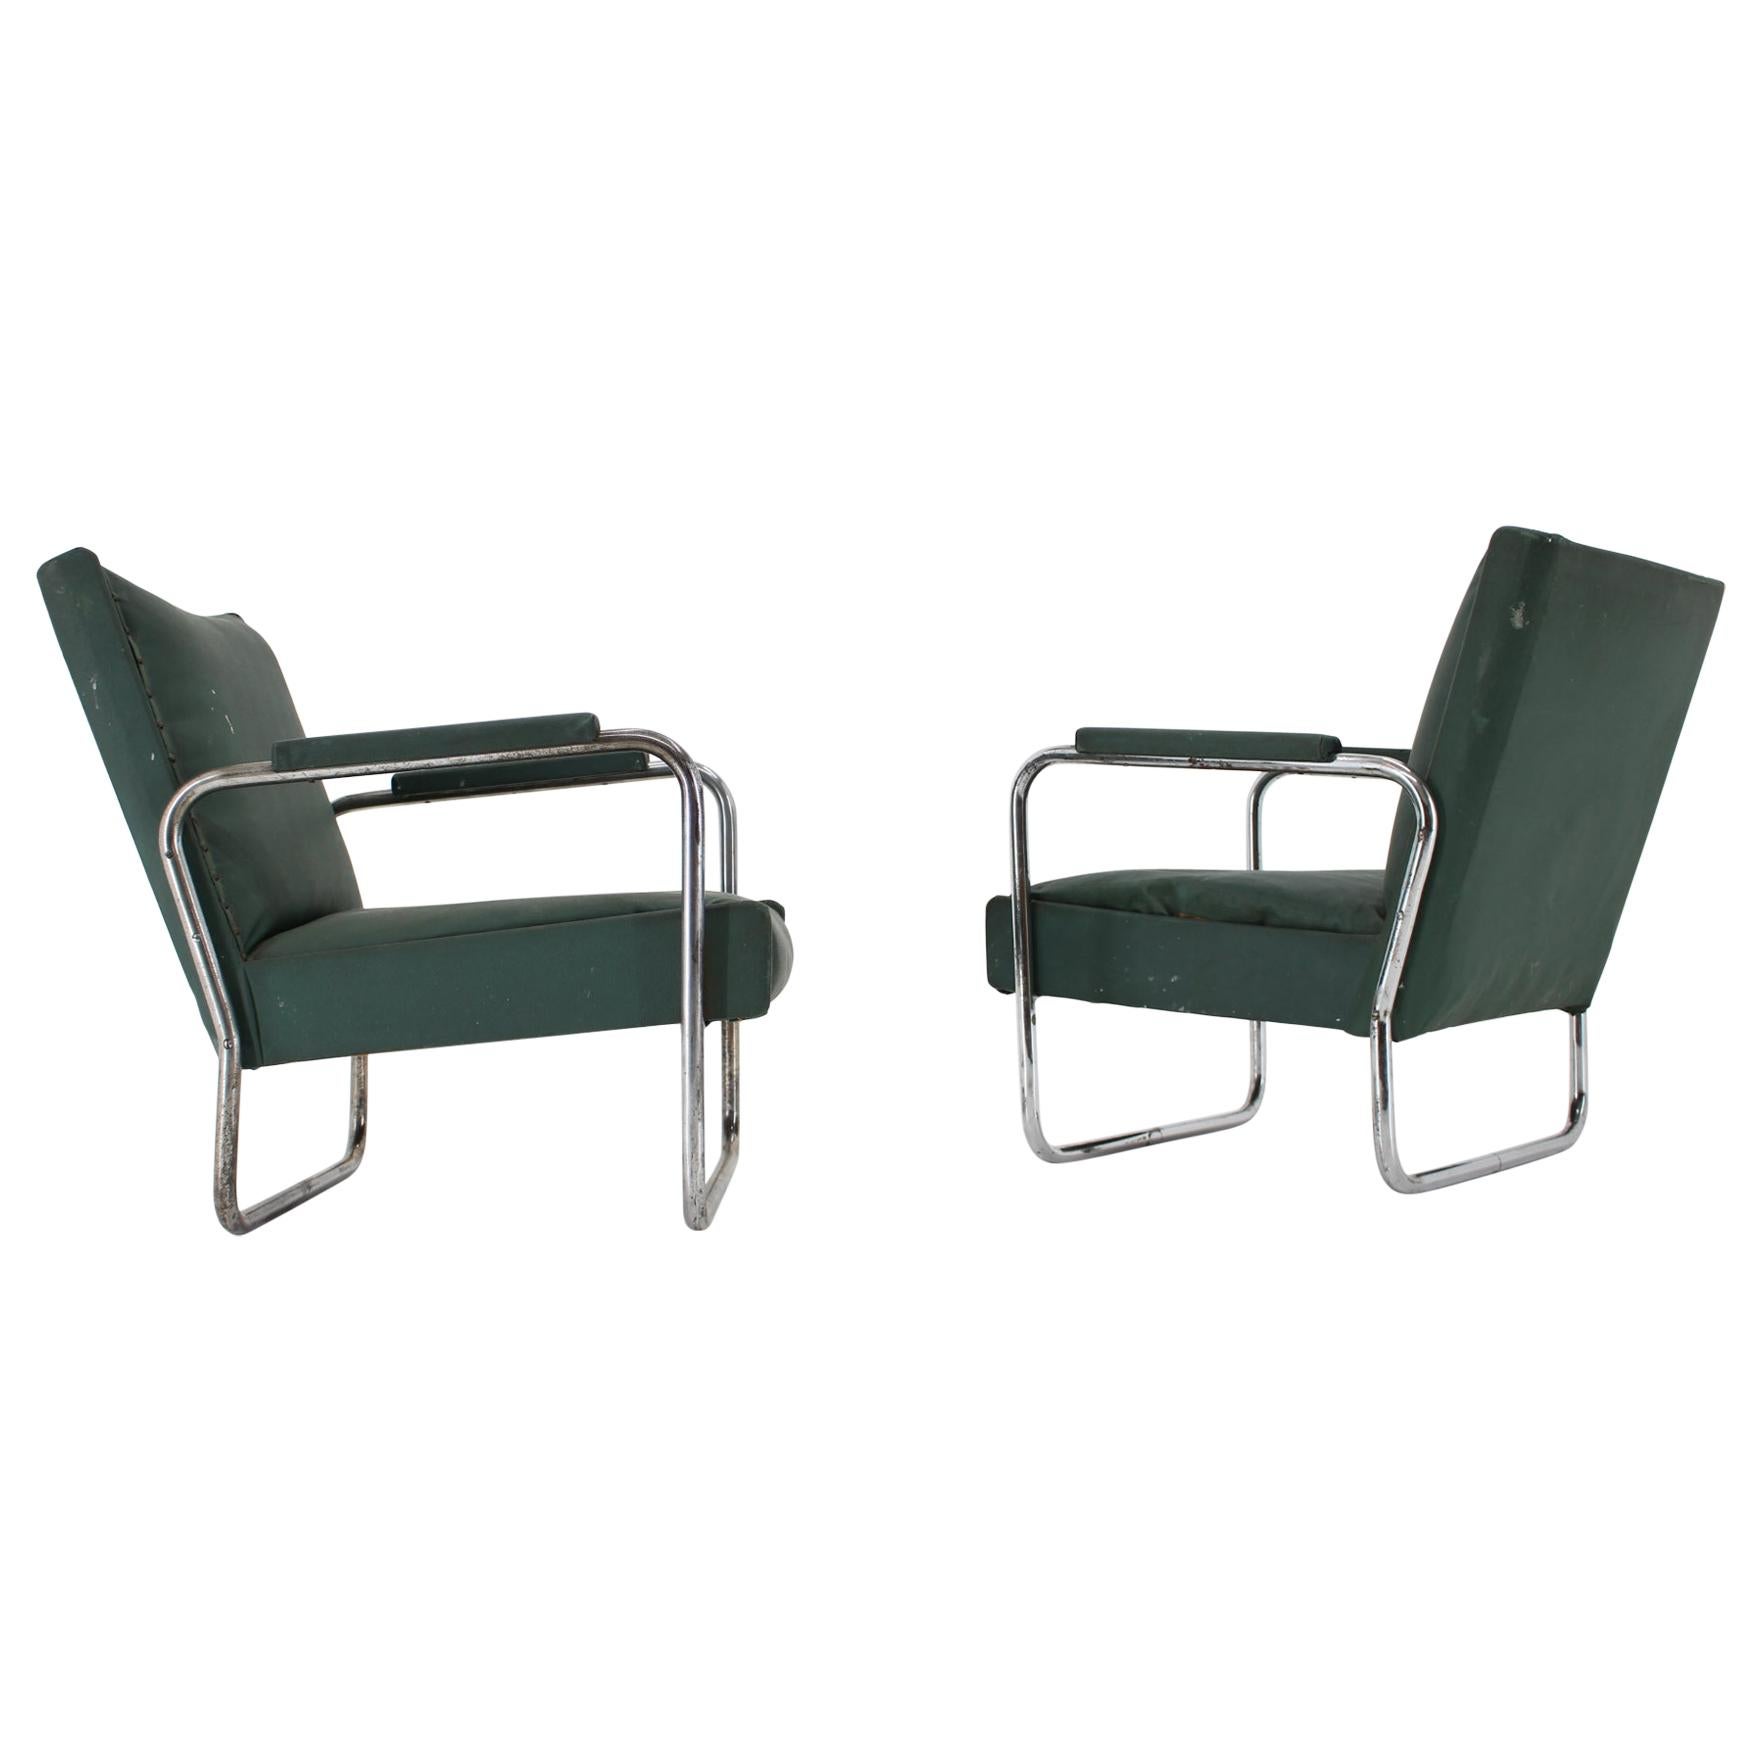 Early Pair of Bauhaus Chrome Armchairs KF-406 by Walter Knoll for Thonet, 1930s